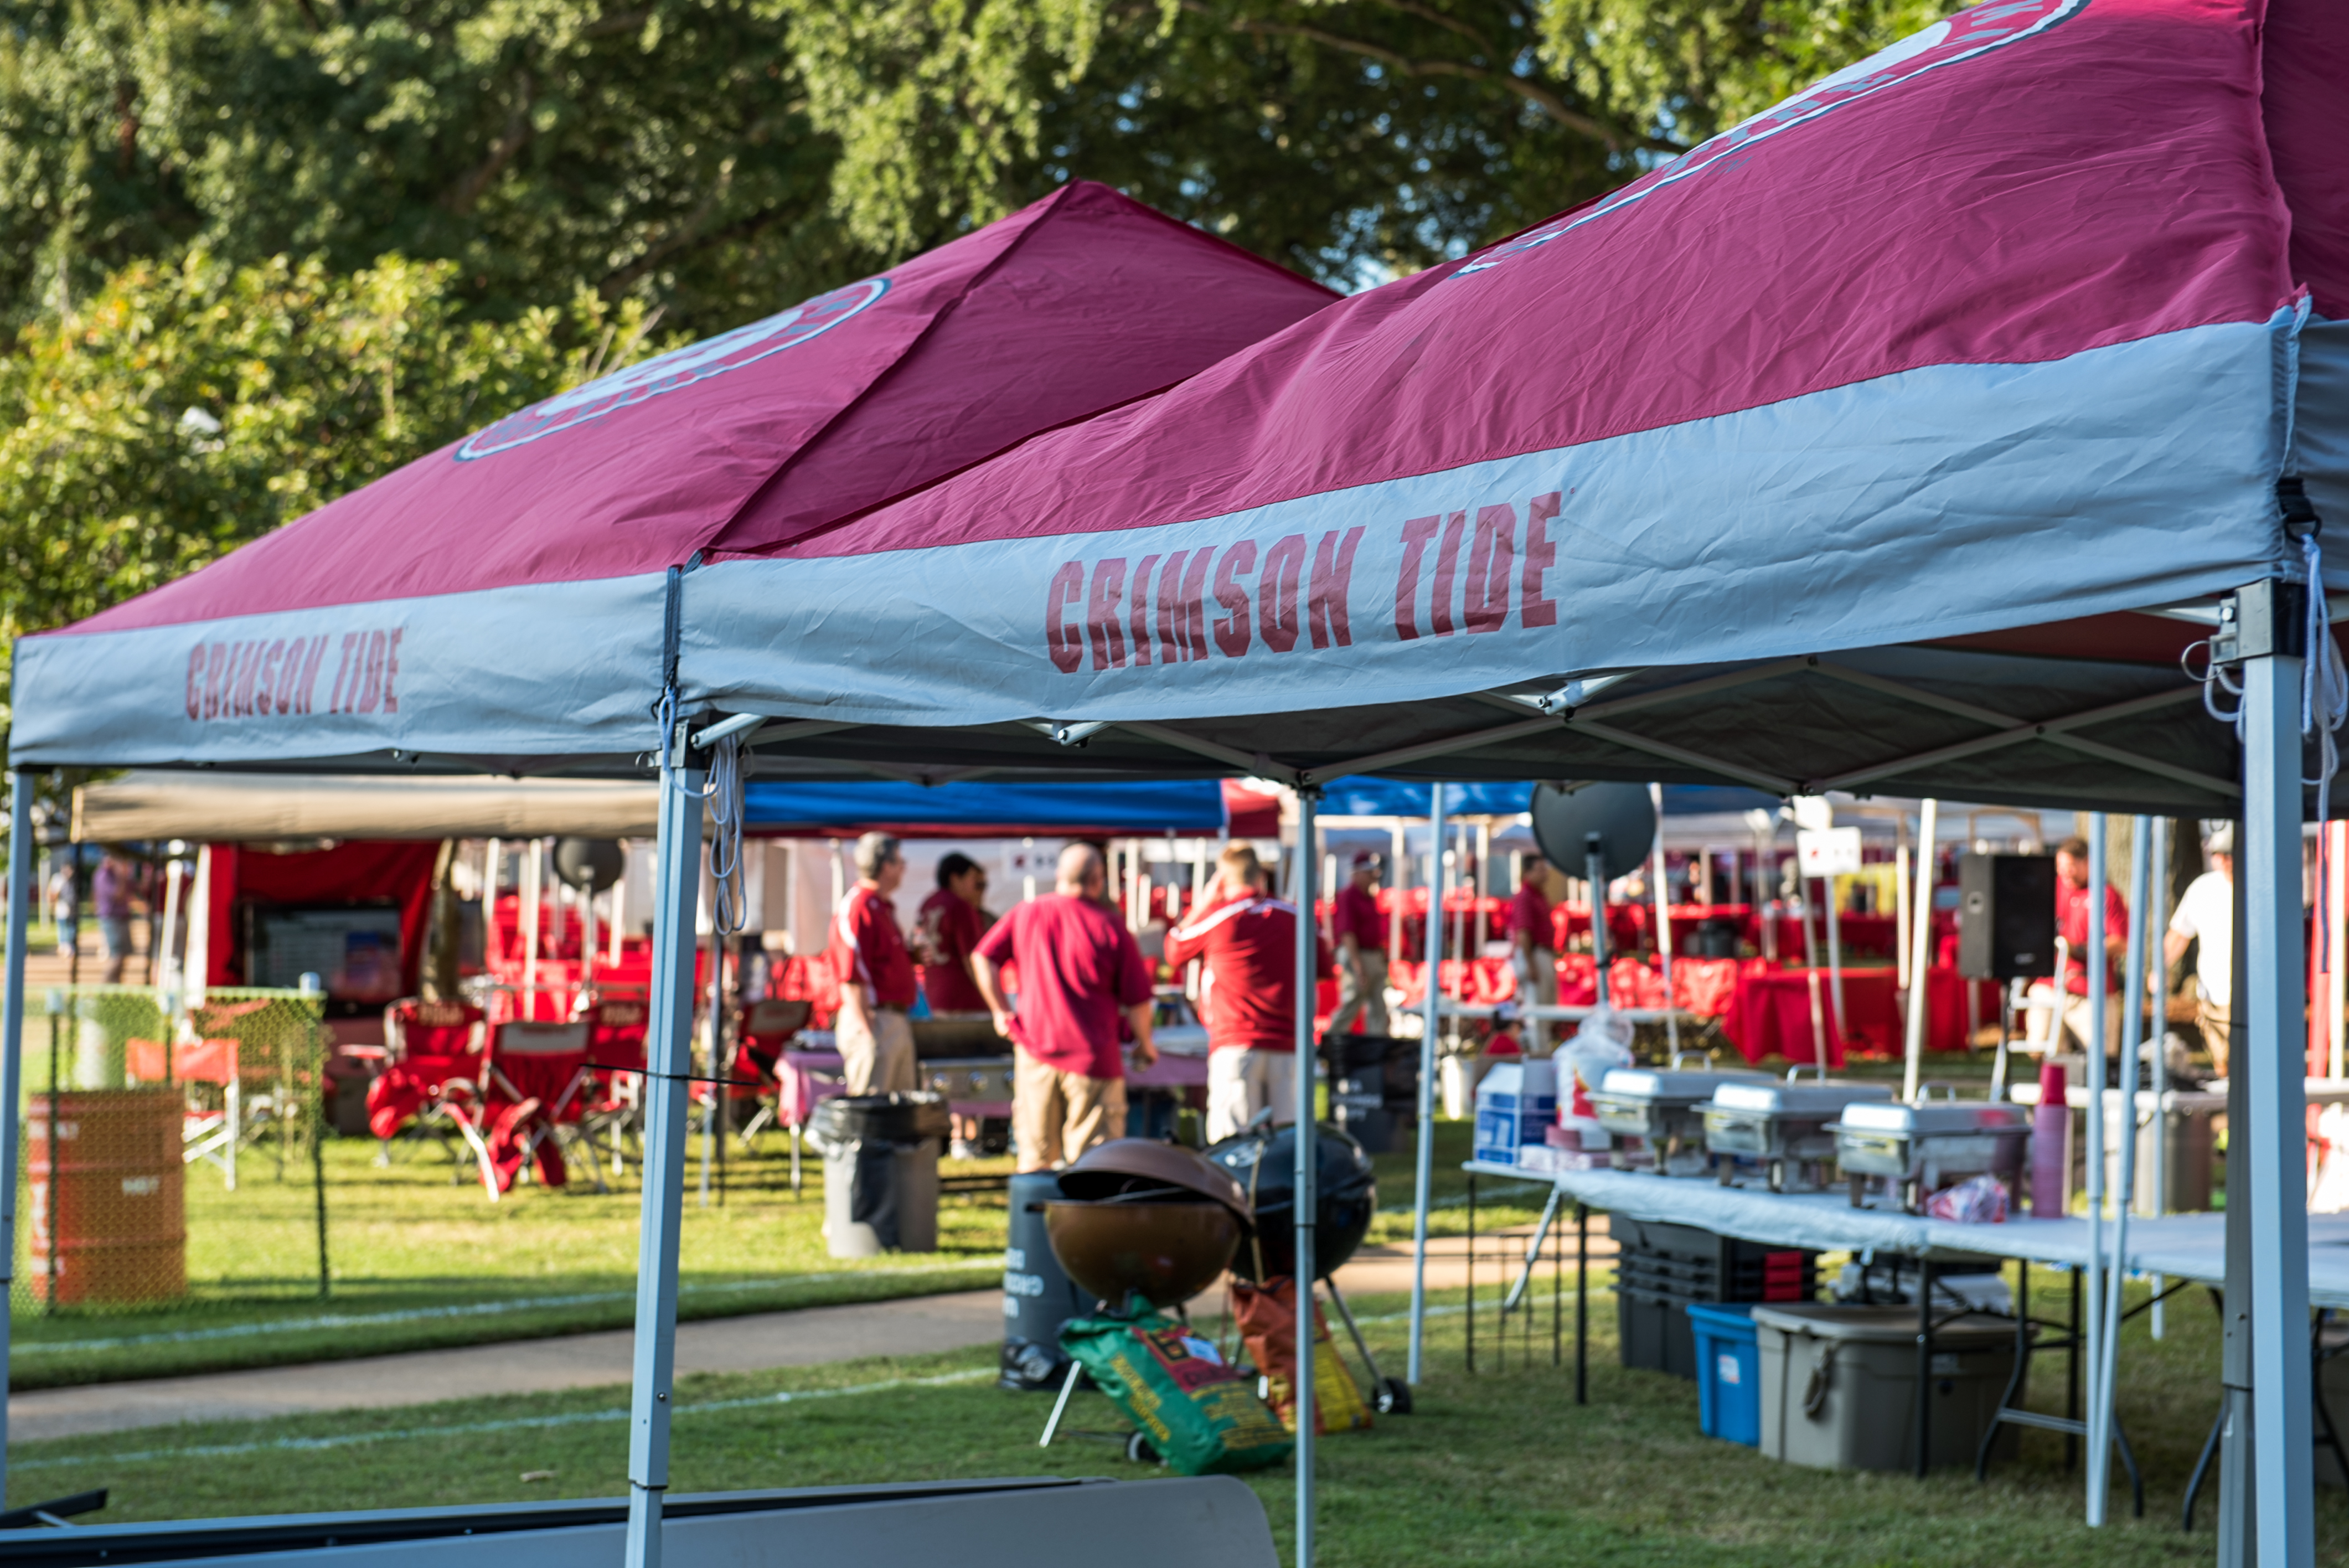 UA Gameday to Open New Family Tailgating Area for Football Season